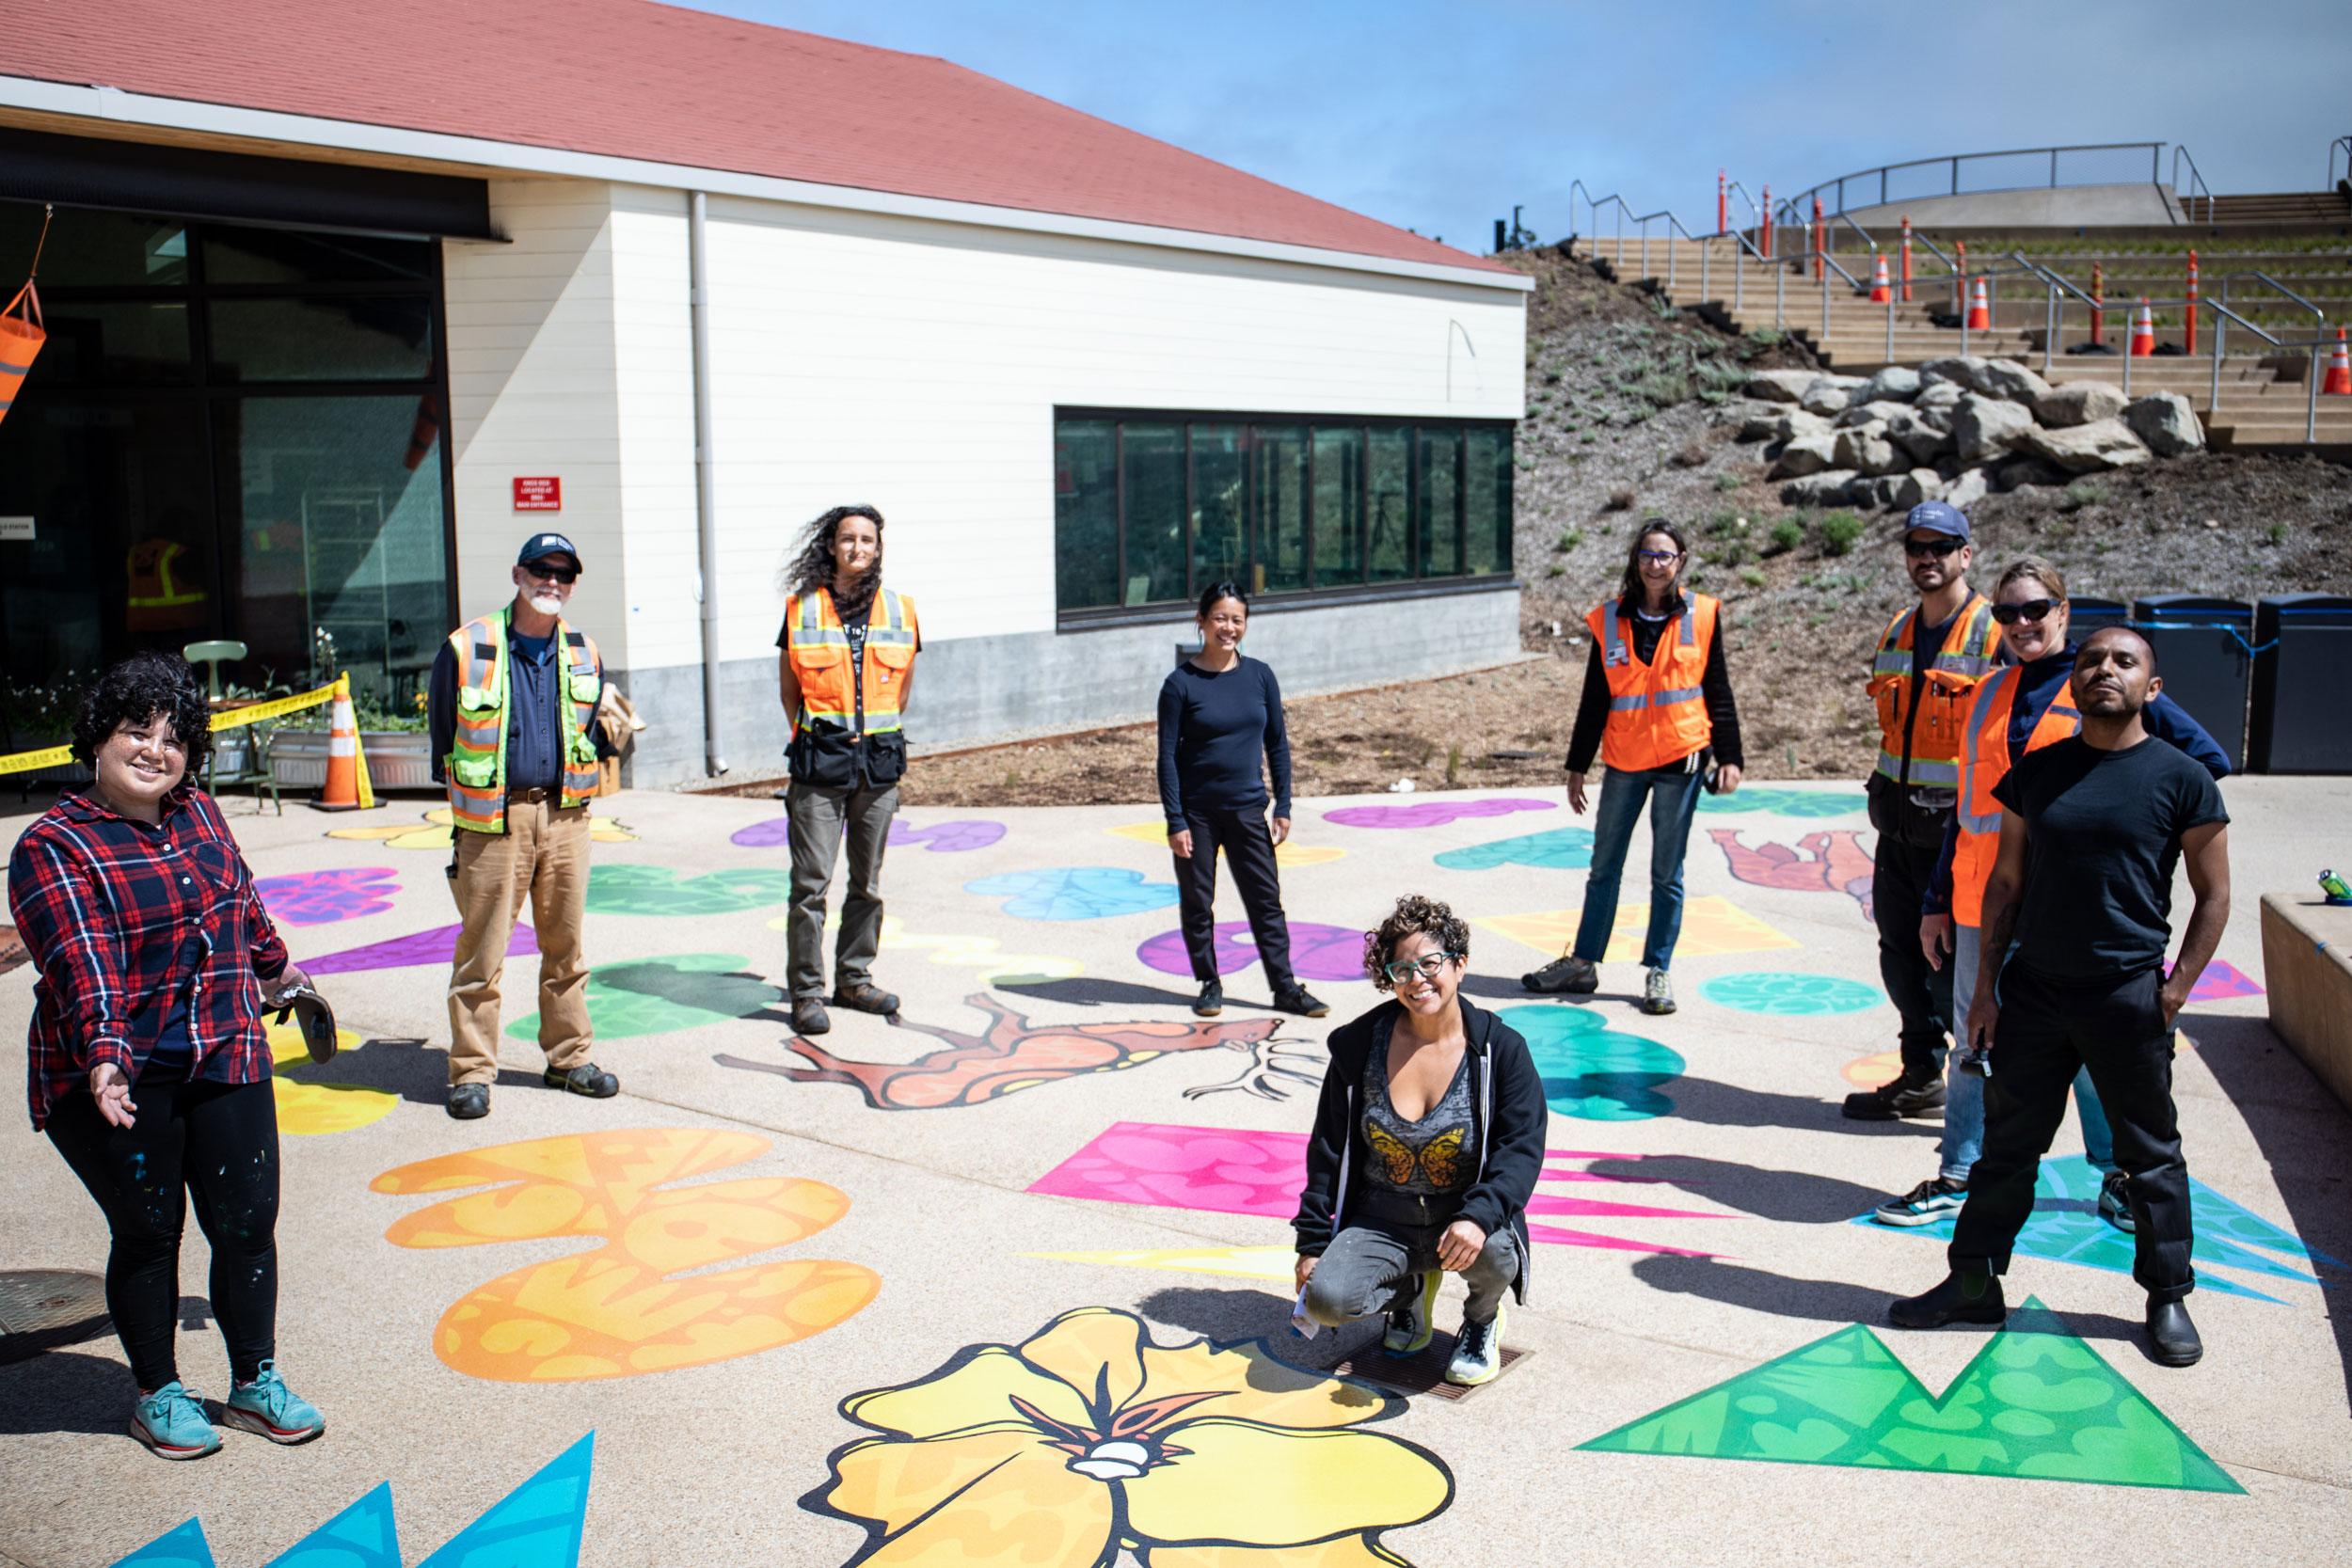 Group photo with Favianna kneeled in the front by her art on ground